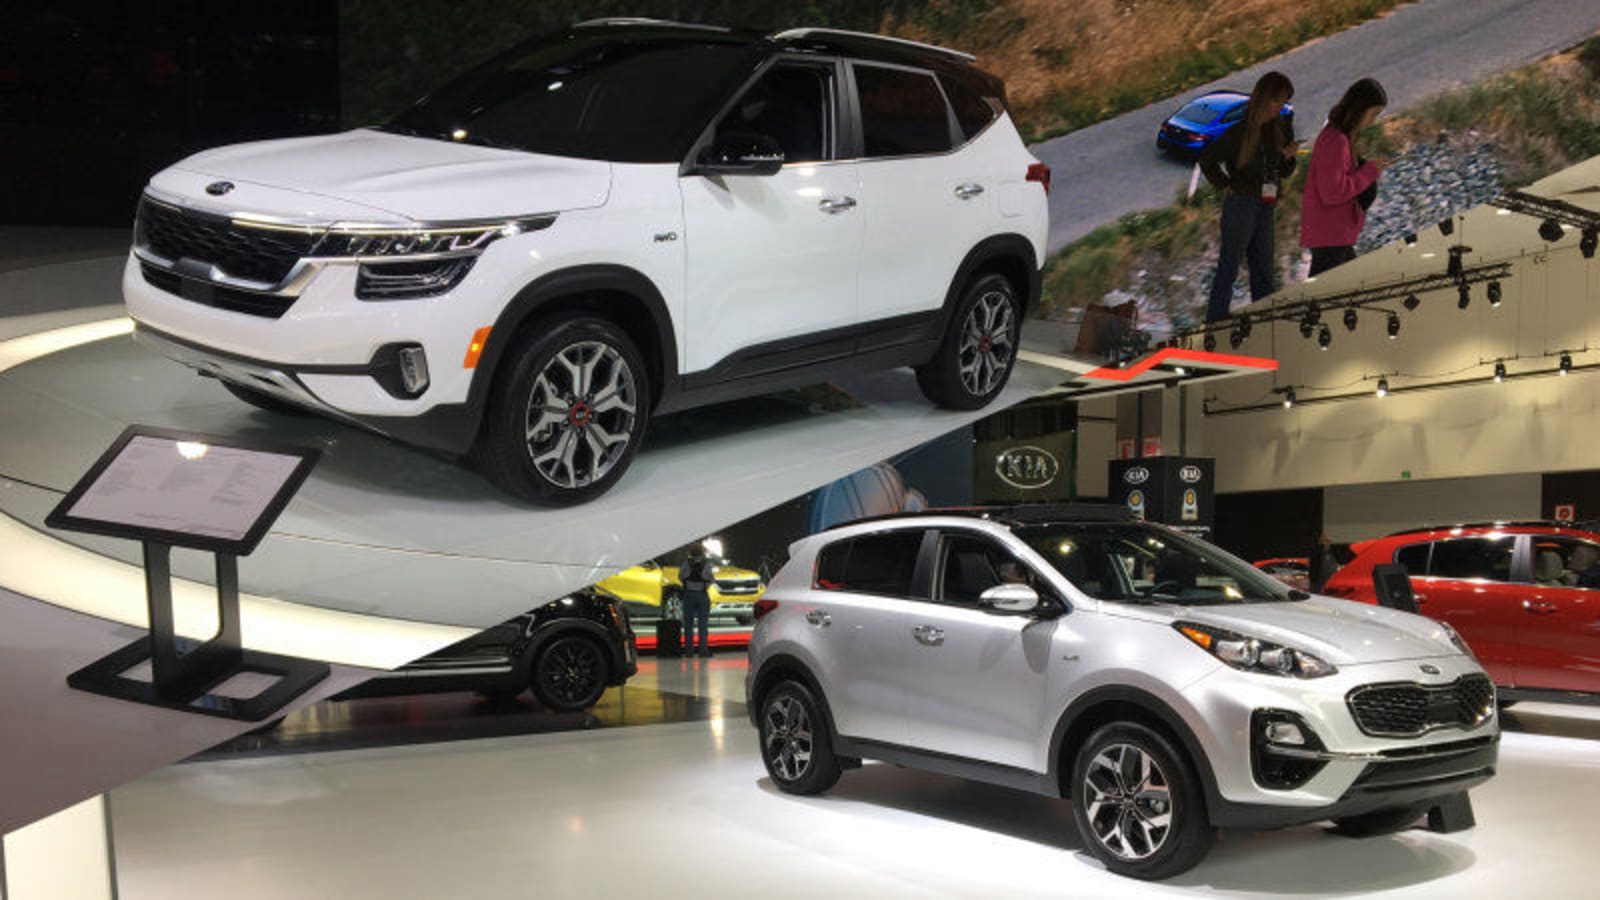 2021 Kia Sportage Review | Price, specs, features and photos - Today